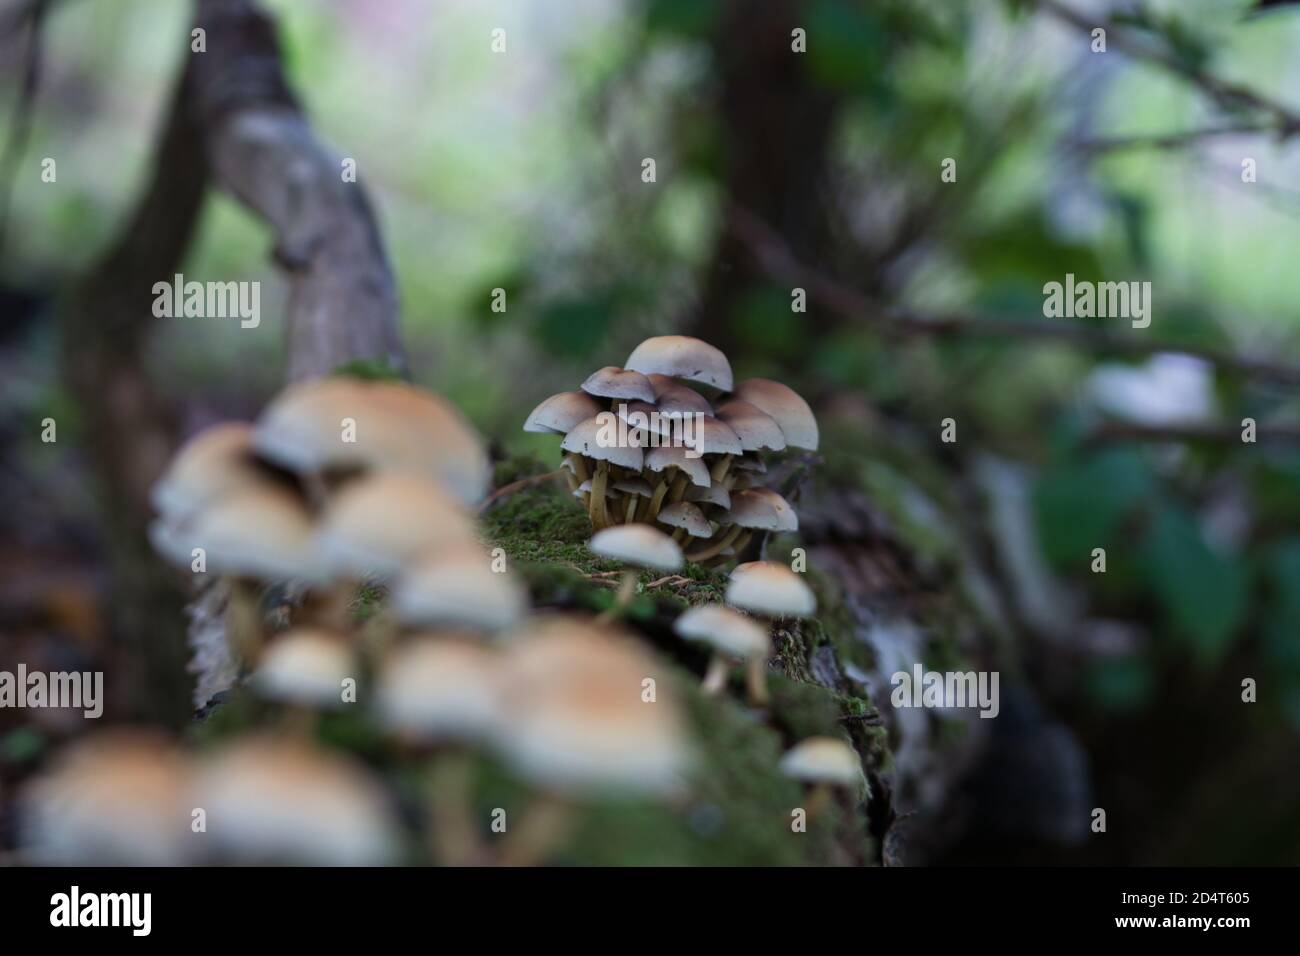 Clustered woodlover , sulphur tufts mushrooms growing in clusters on a dead tree trunk covered with moss in the woodland,  fall season  background Stock Photo